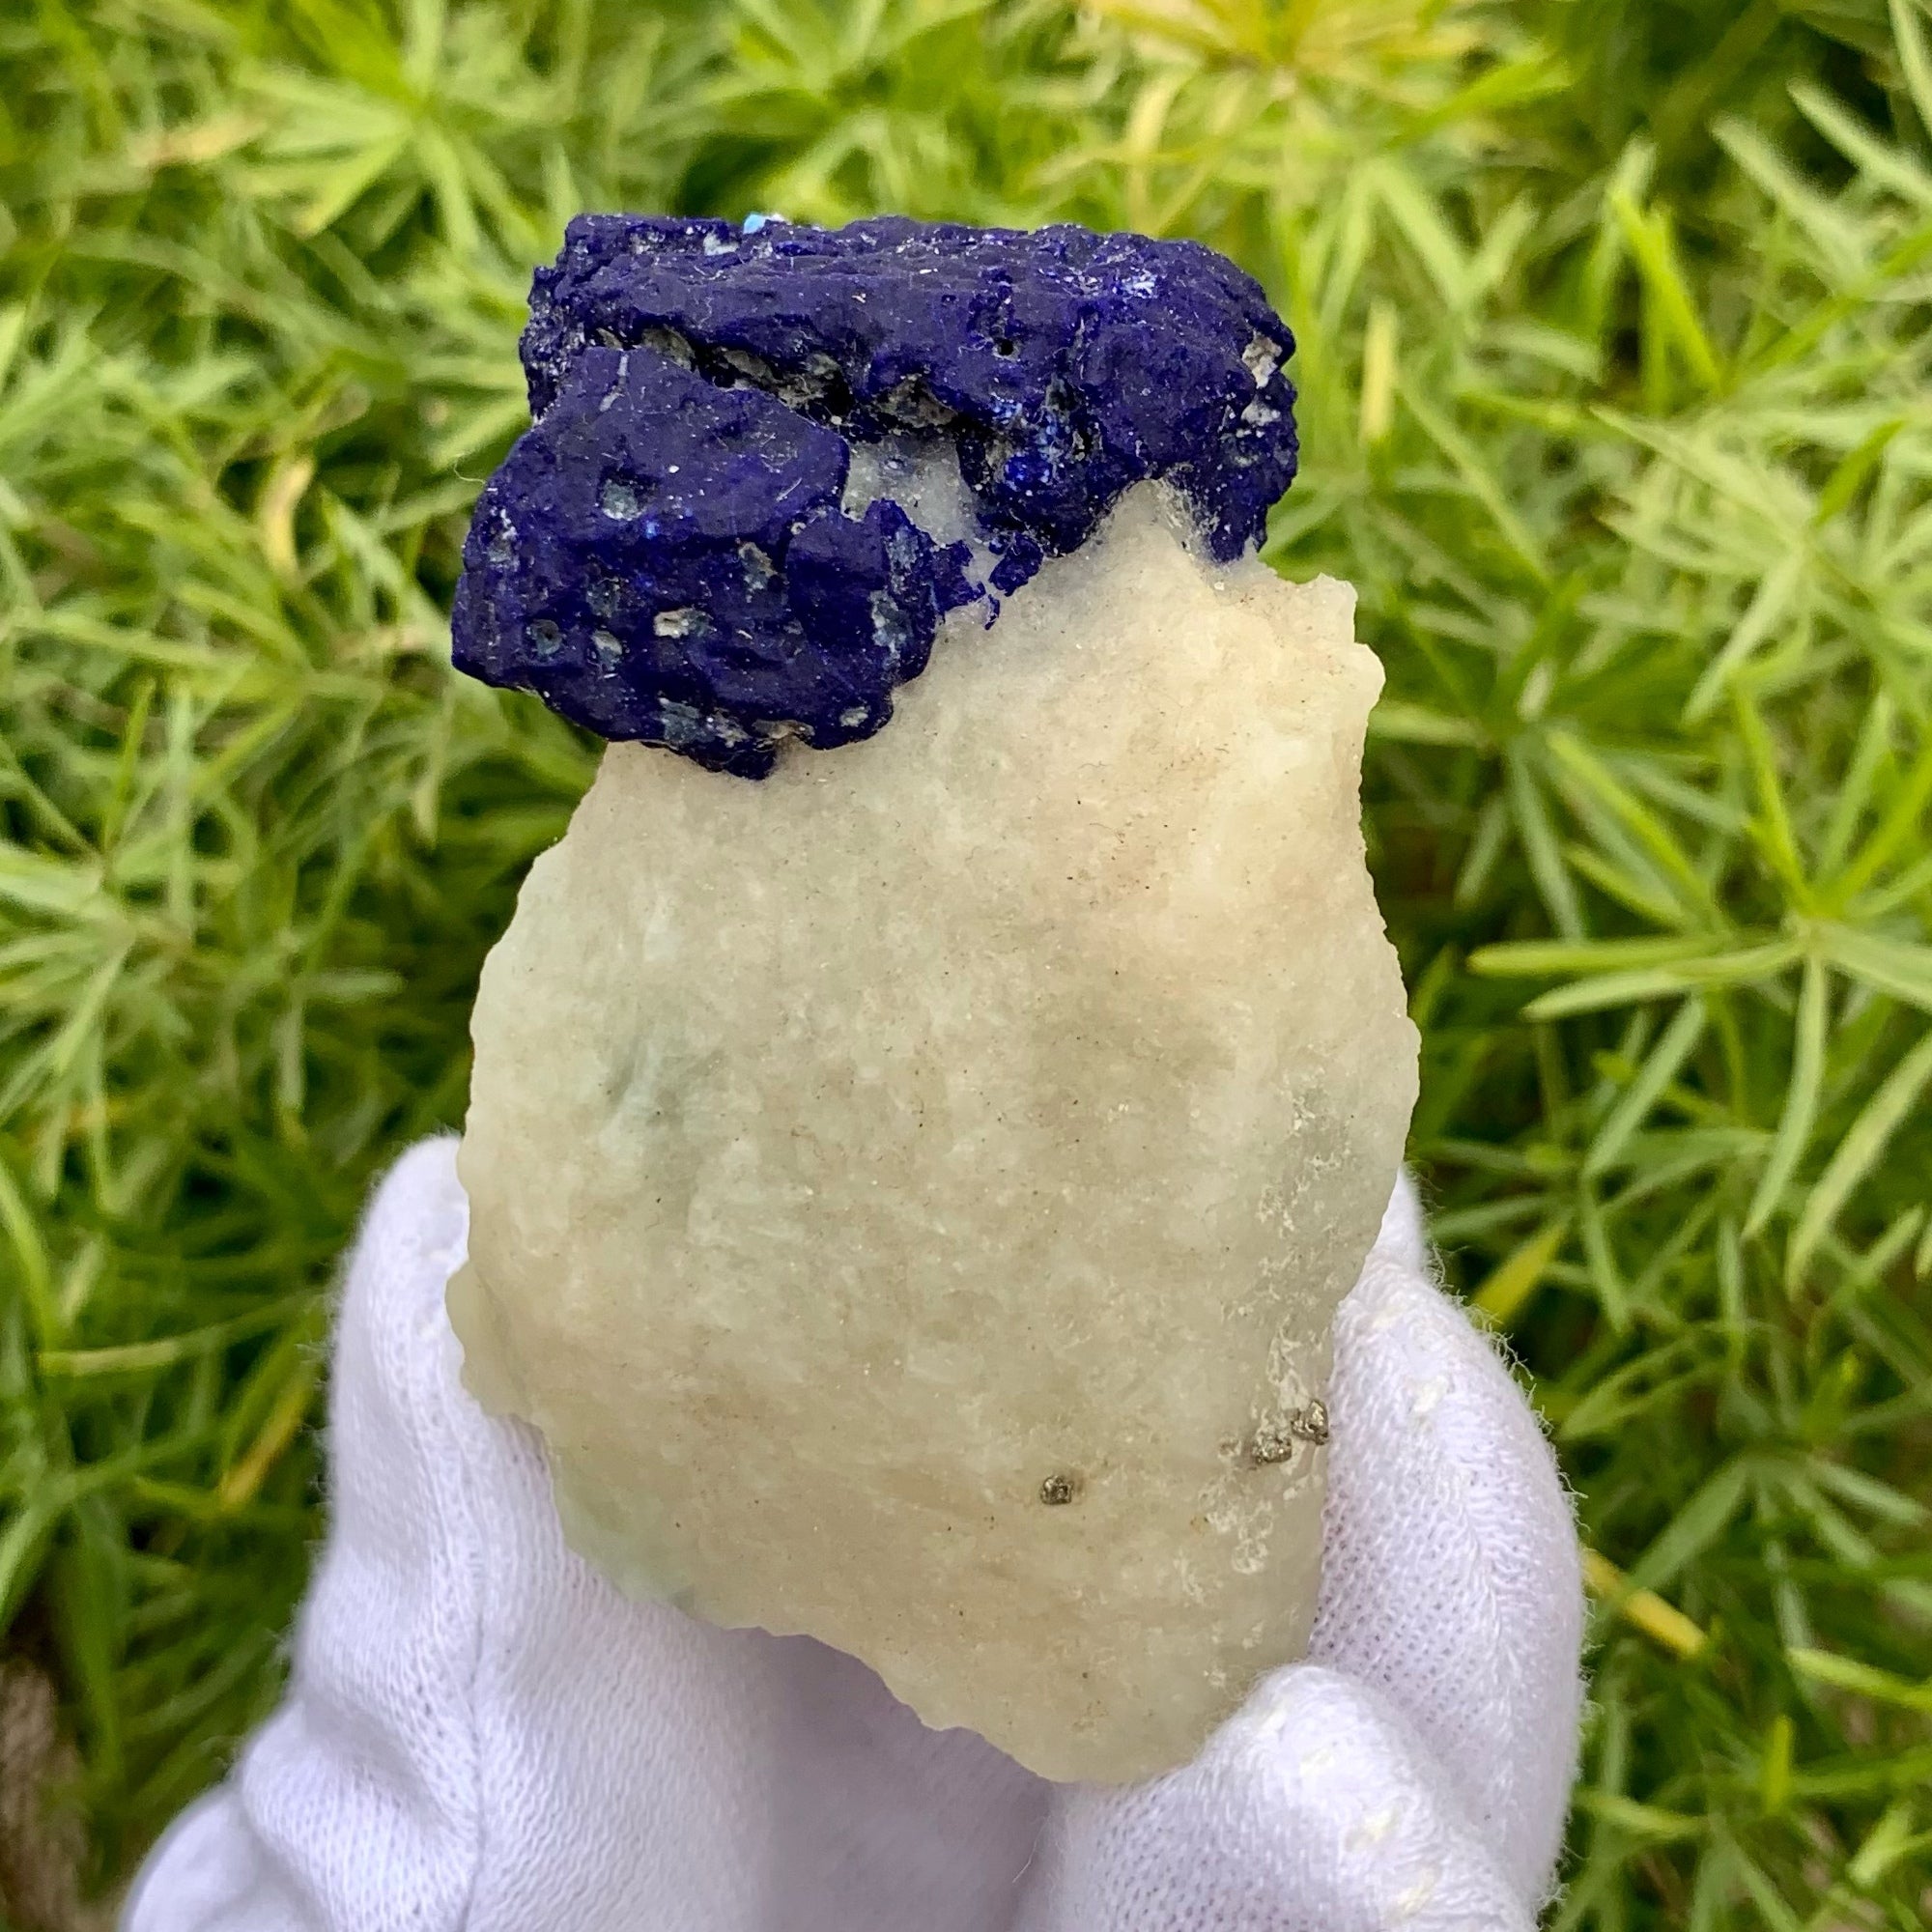 Impressive Focal Crystal Of Lazurite Nicely Perched On Calcite Matrix